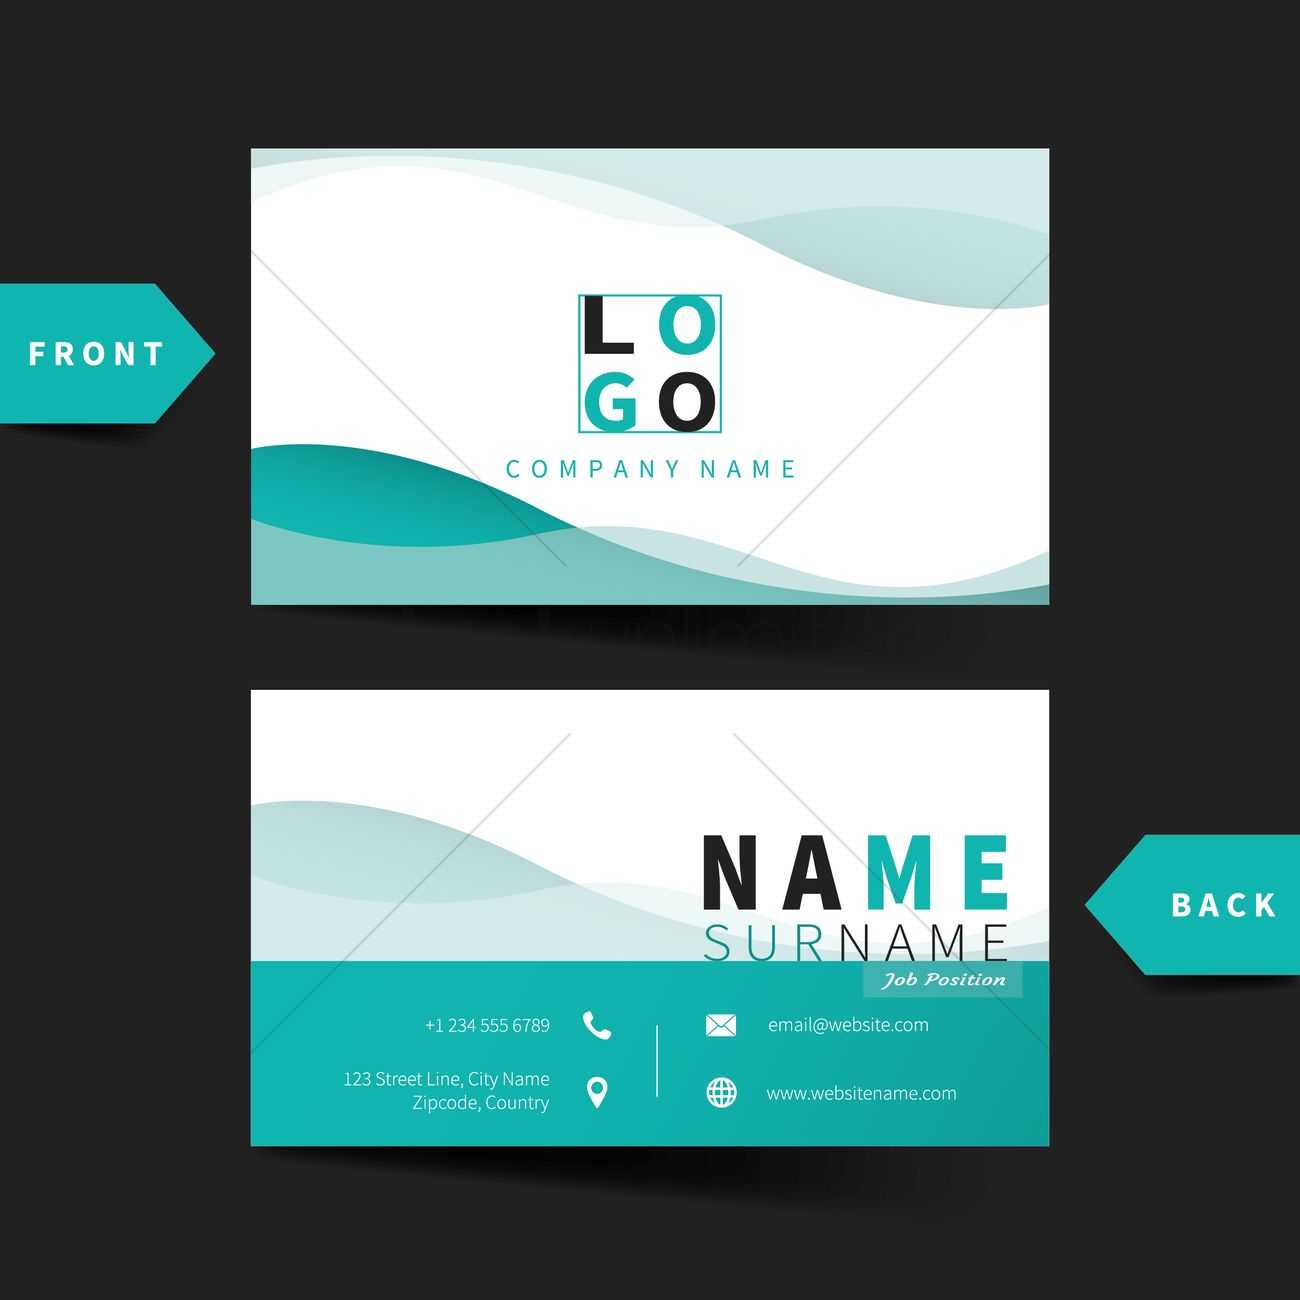 Business Card Template Vector Image – 1822200 | Stockunlimited In Email Business Card Templates